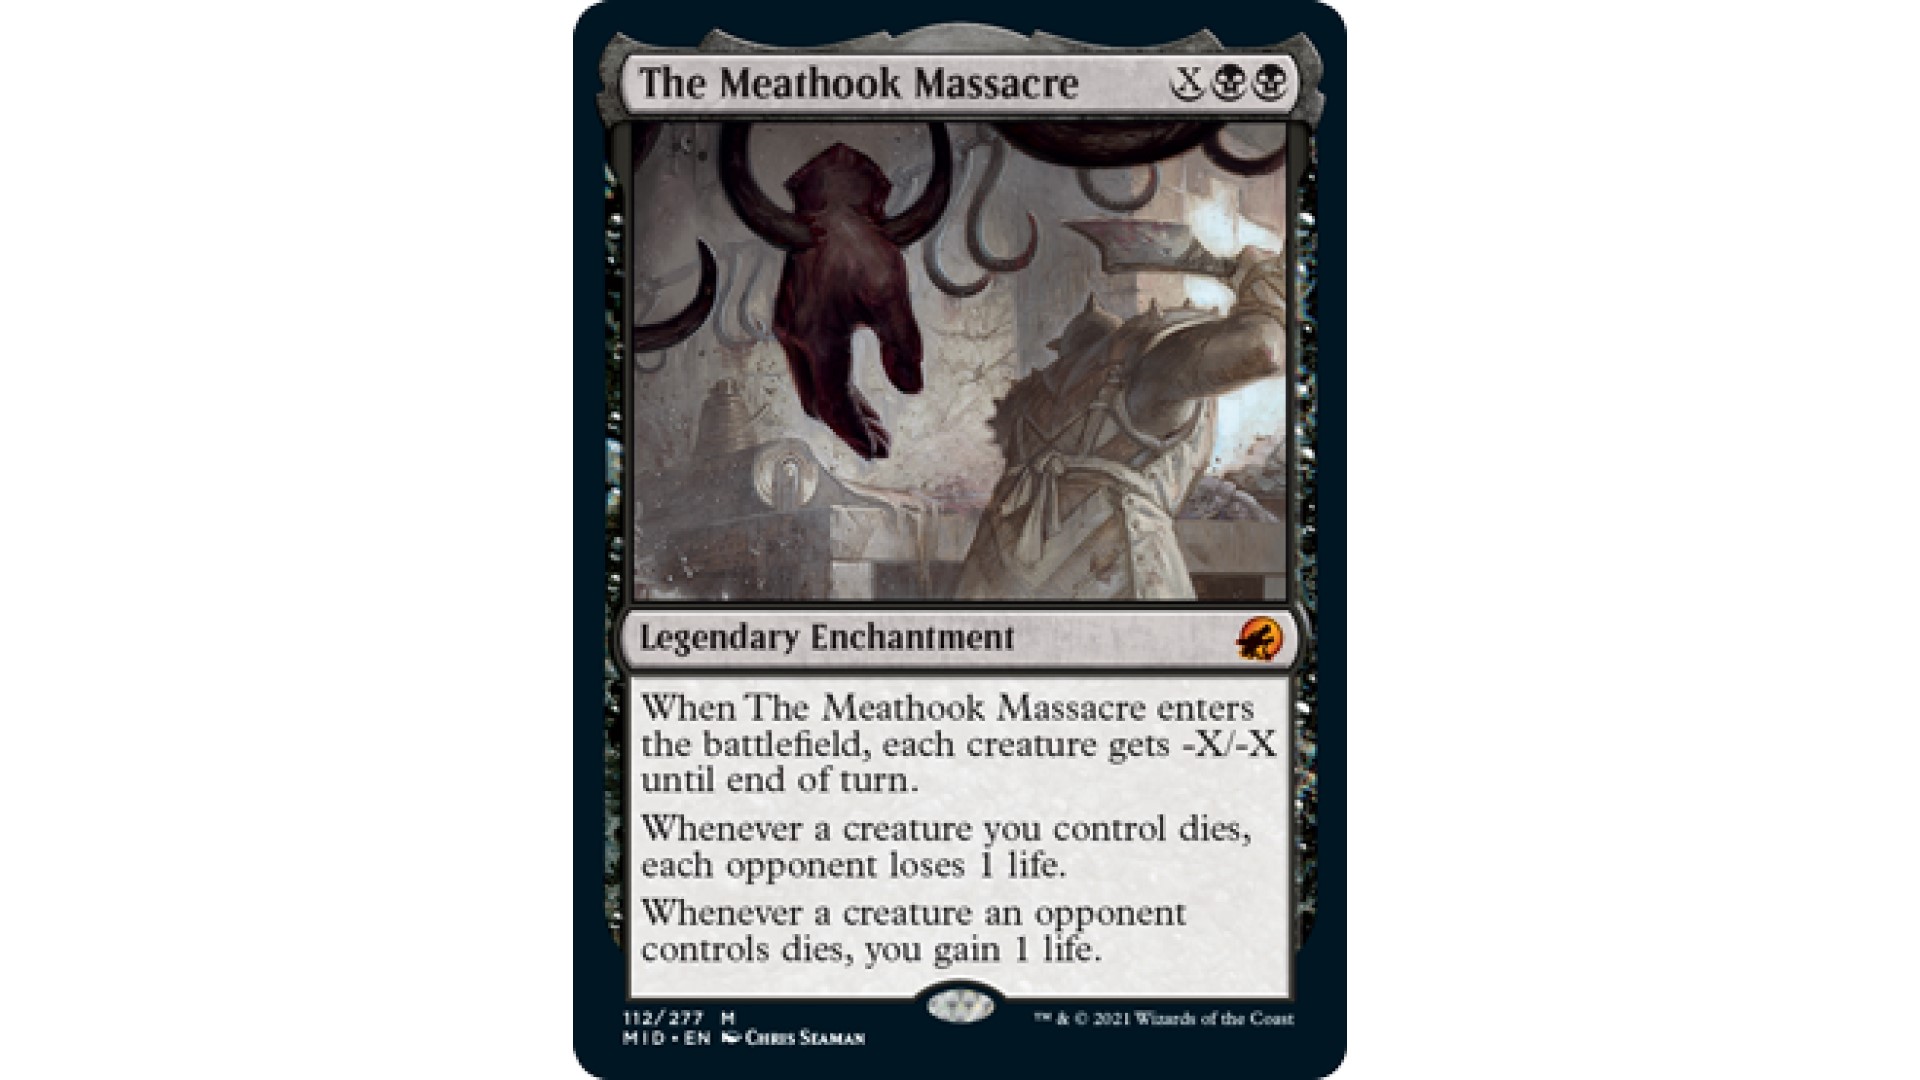 The Meathook Massacre is first MTG Standard ban since January